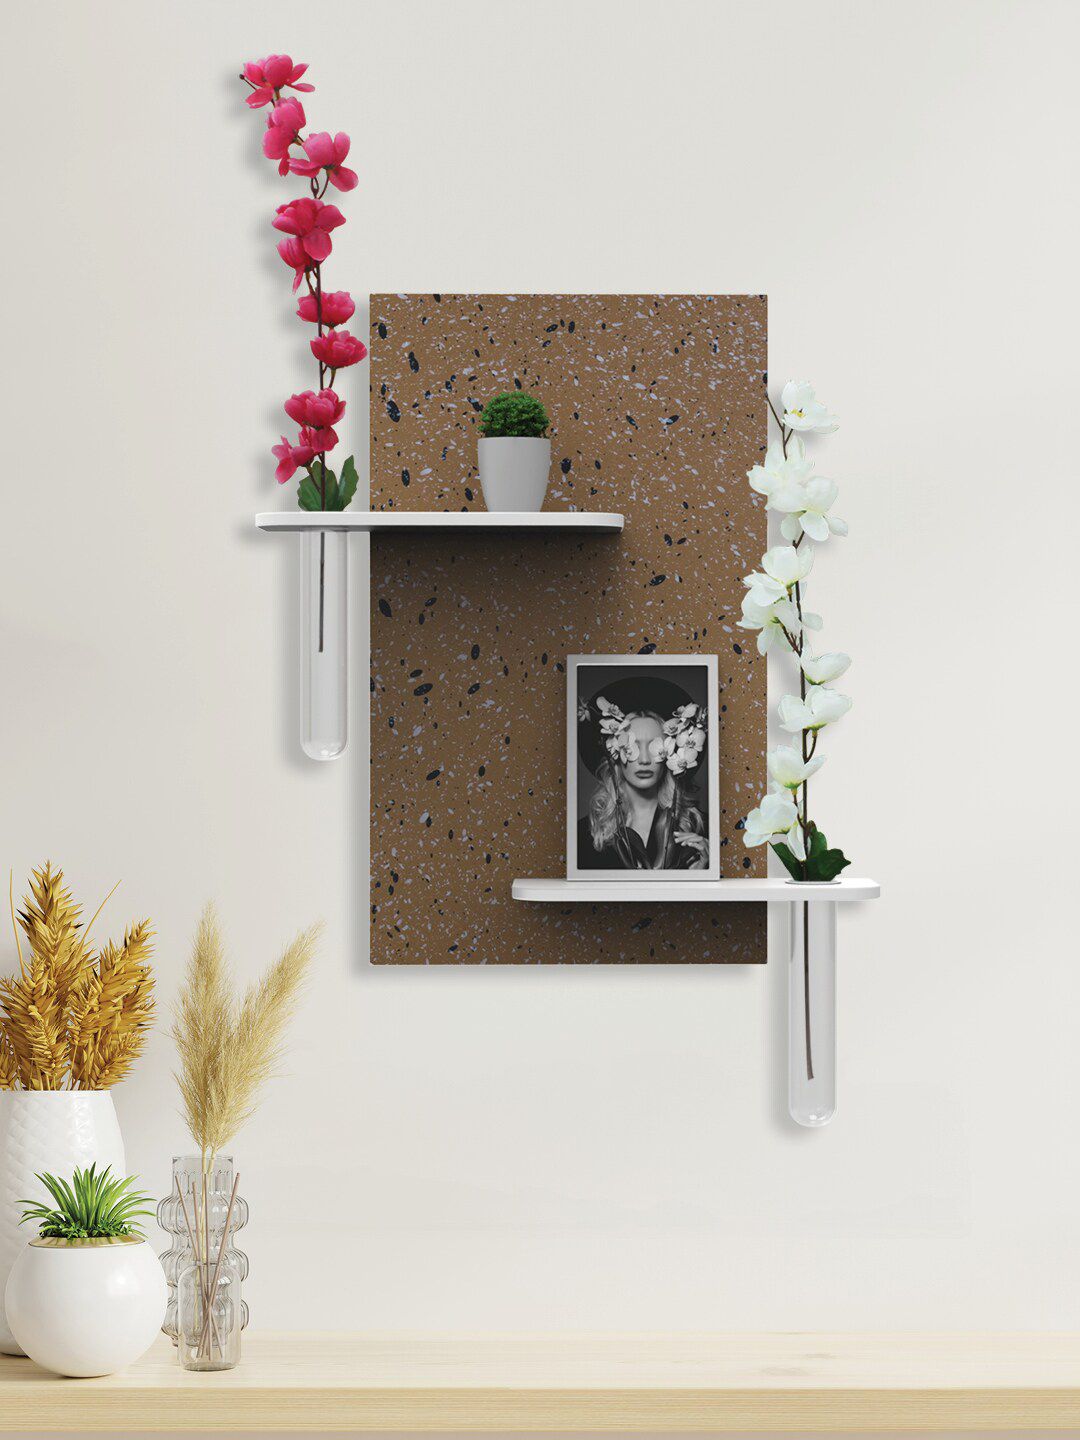 RANDOM Rectangular Wall Hanging MDF Wood Planter Stand Price in India